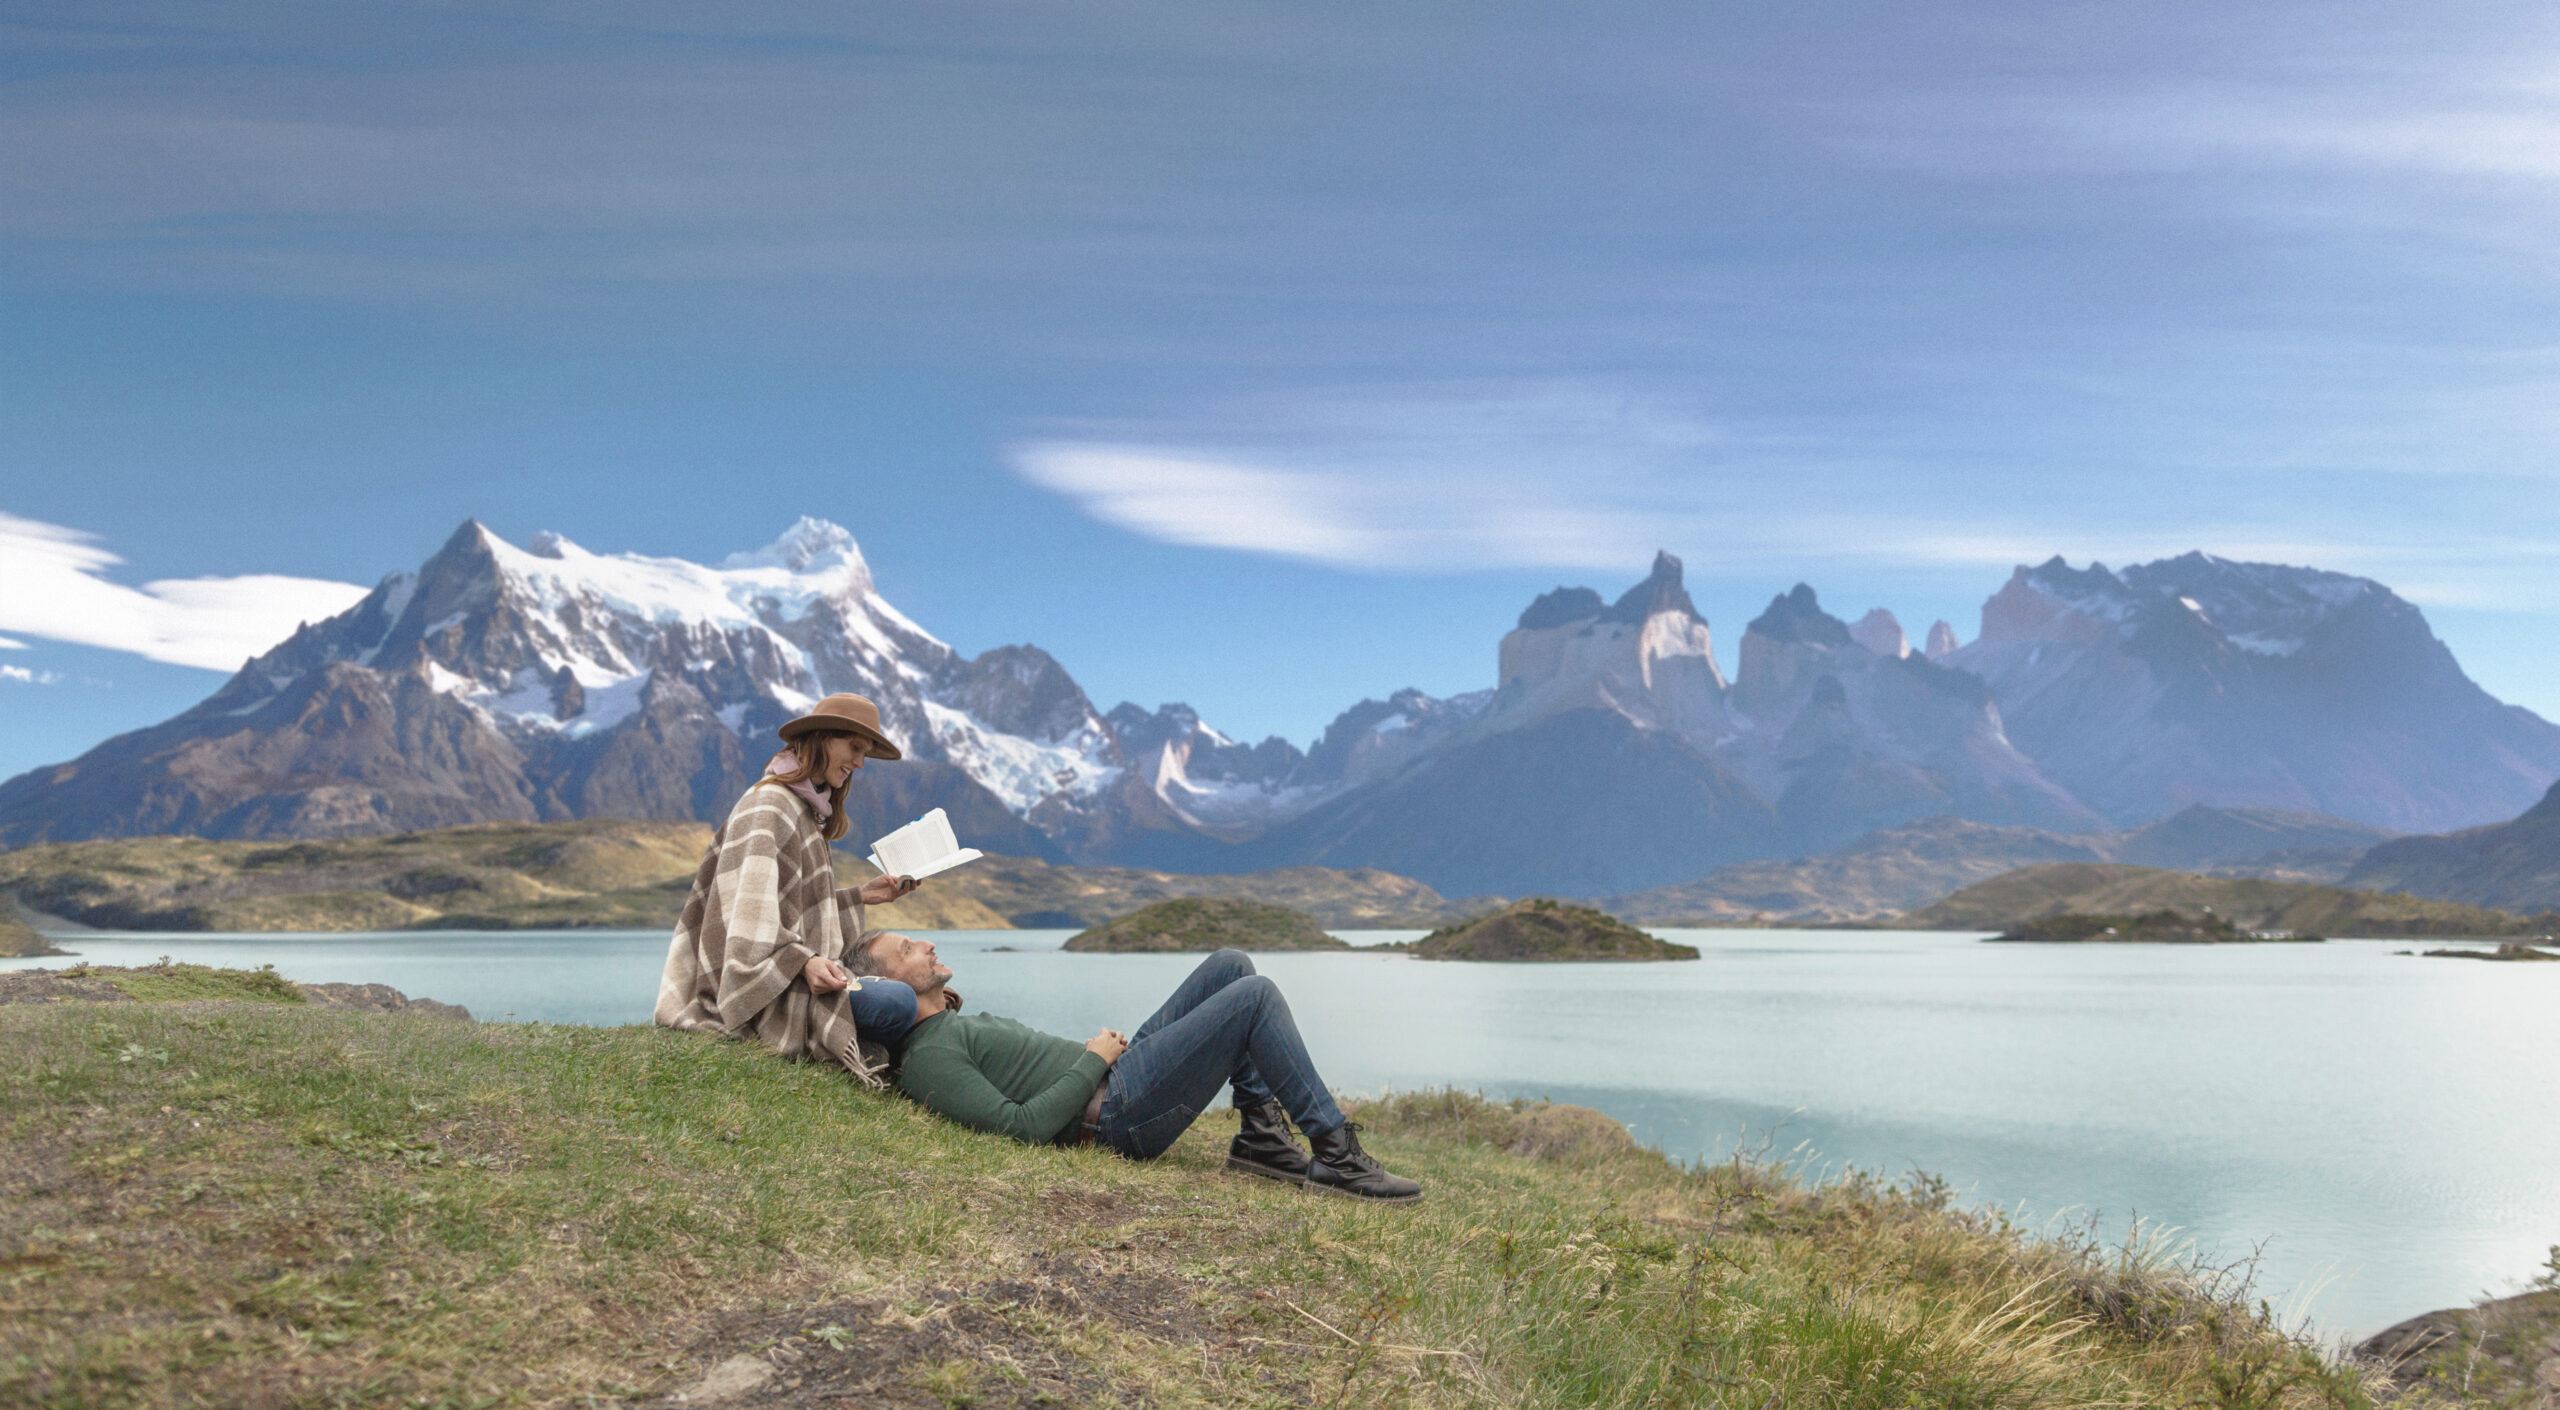 Tour packages to Torres del Paine National Park from USA